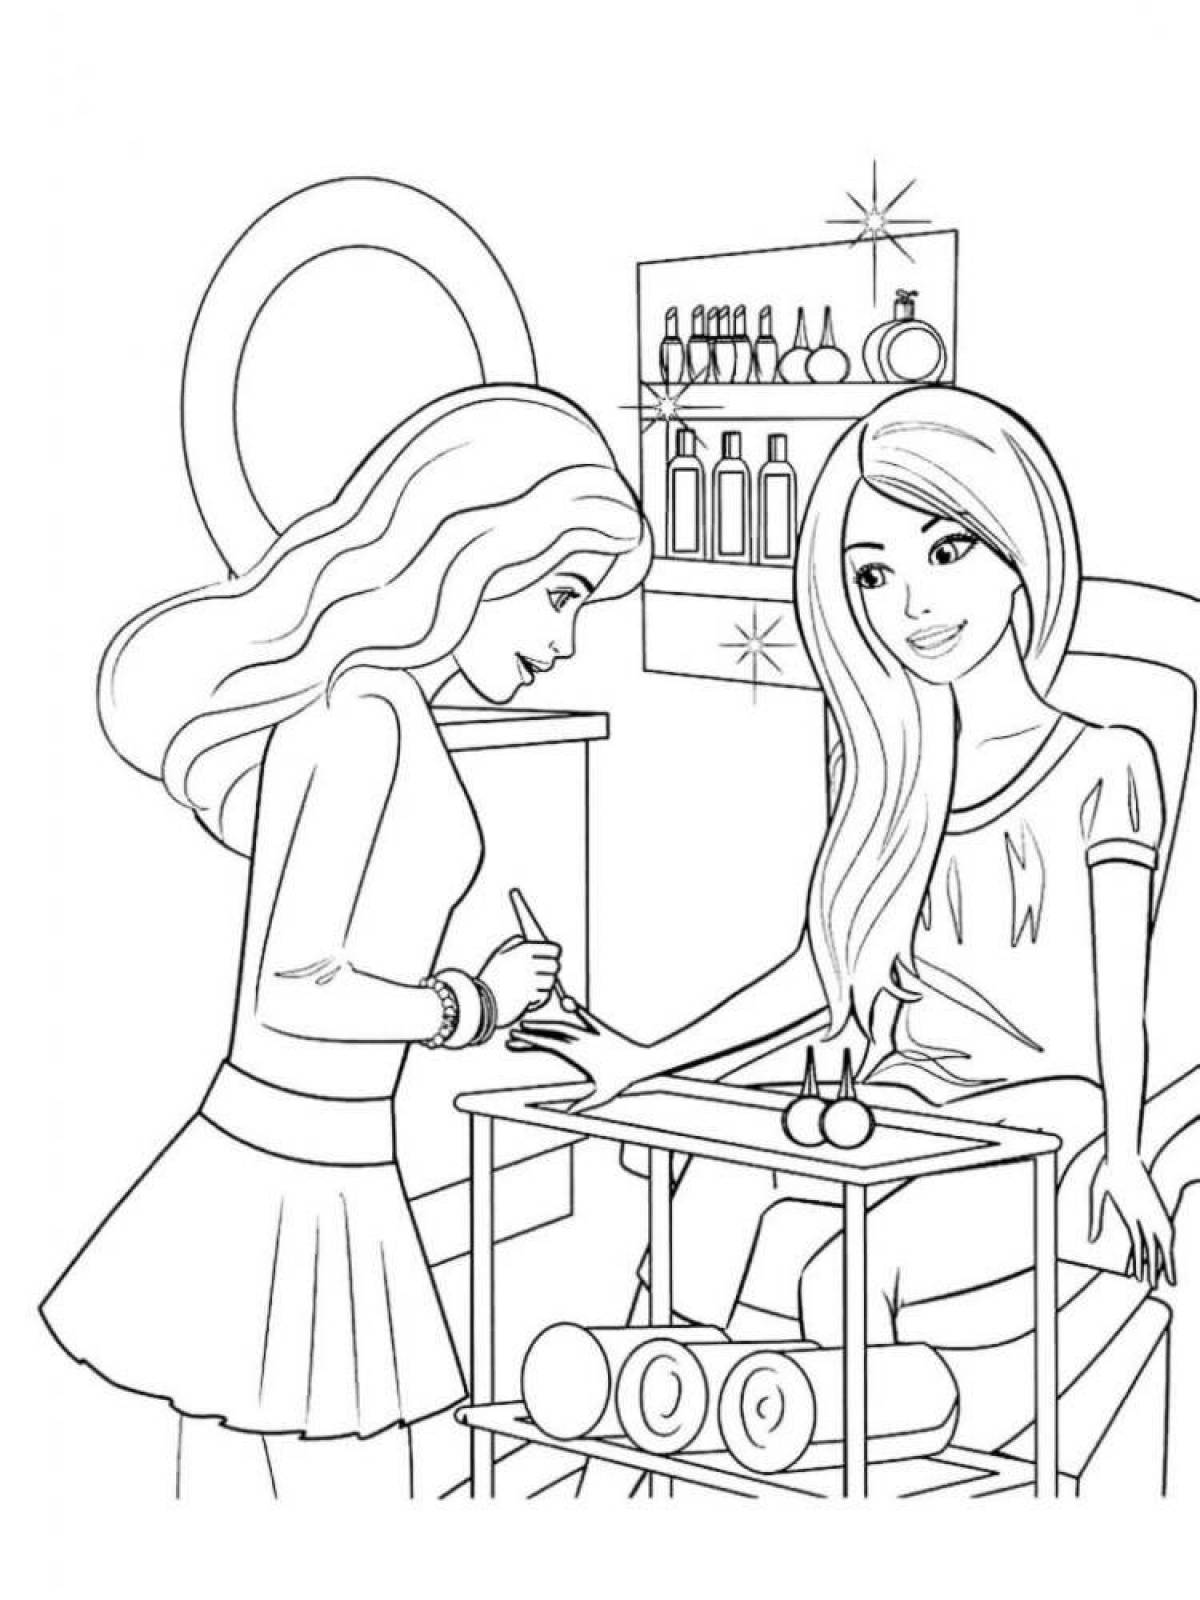 Coloring page funny beauty salon